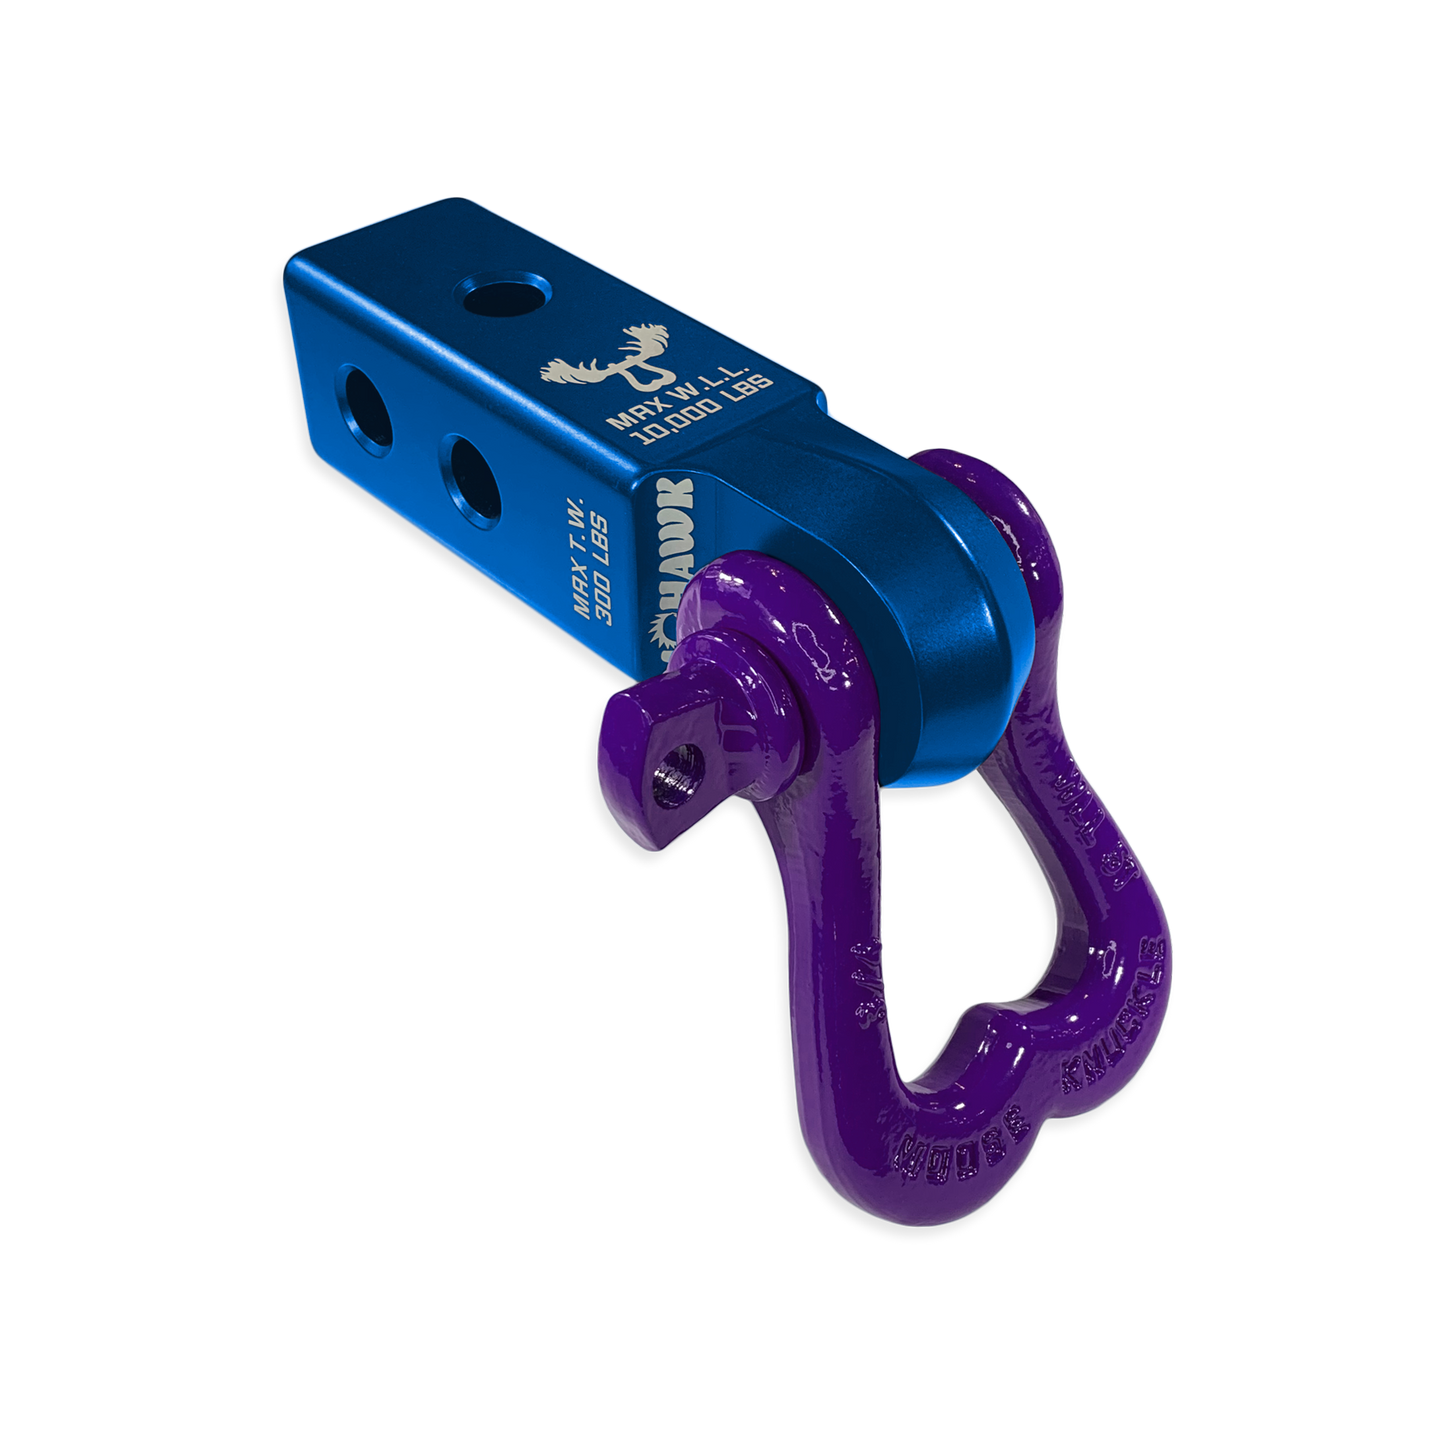 Moose Knuckle Offroad XL Grape Escape Purple D-Ring Shackle and Blue Pill Mohawk 2.0 Shackle Receiver Combo for off-roading vehicle recovery and towing.